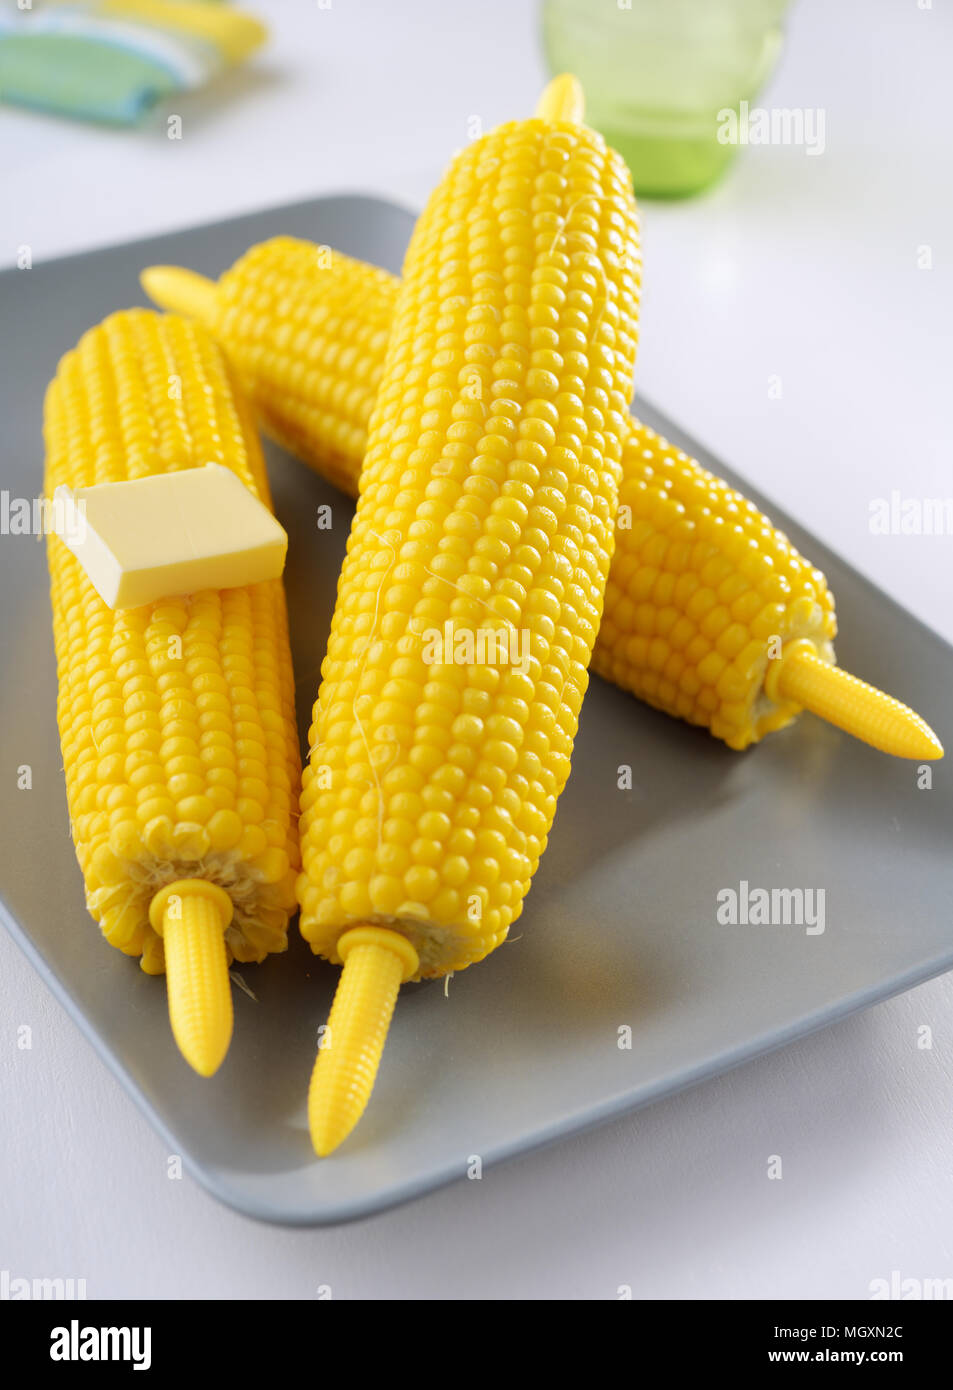 Steamed corn cobs on a plate Stock Photo